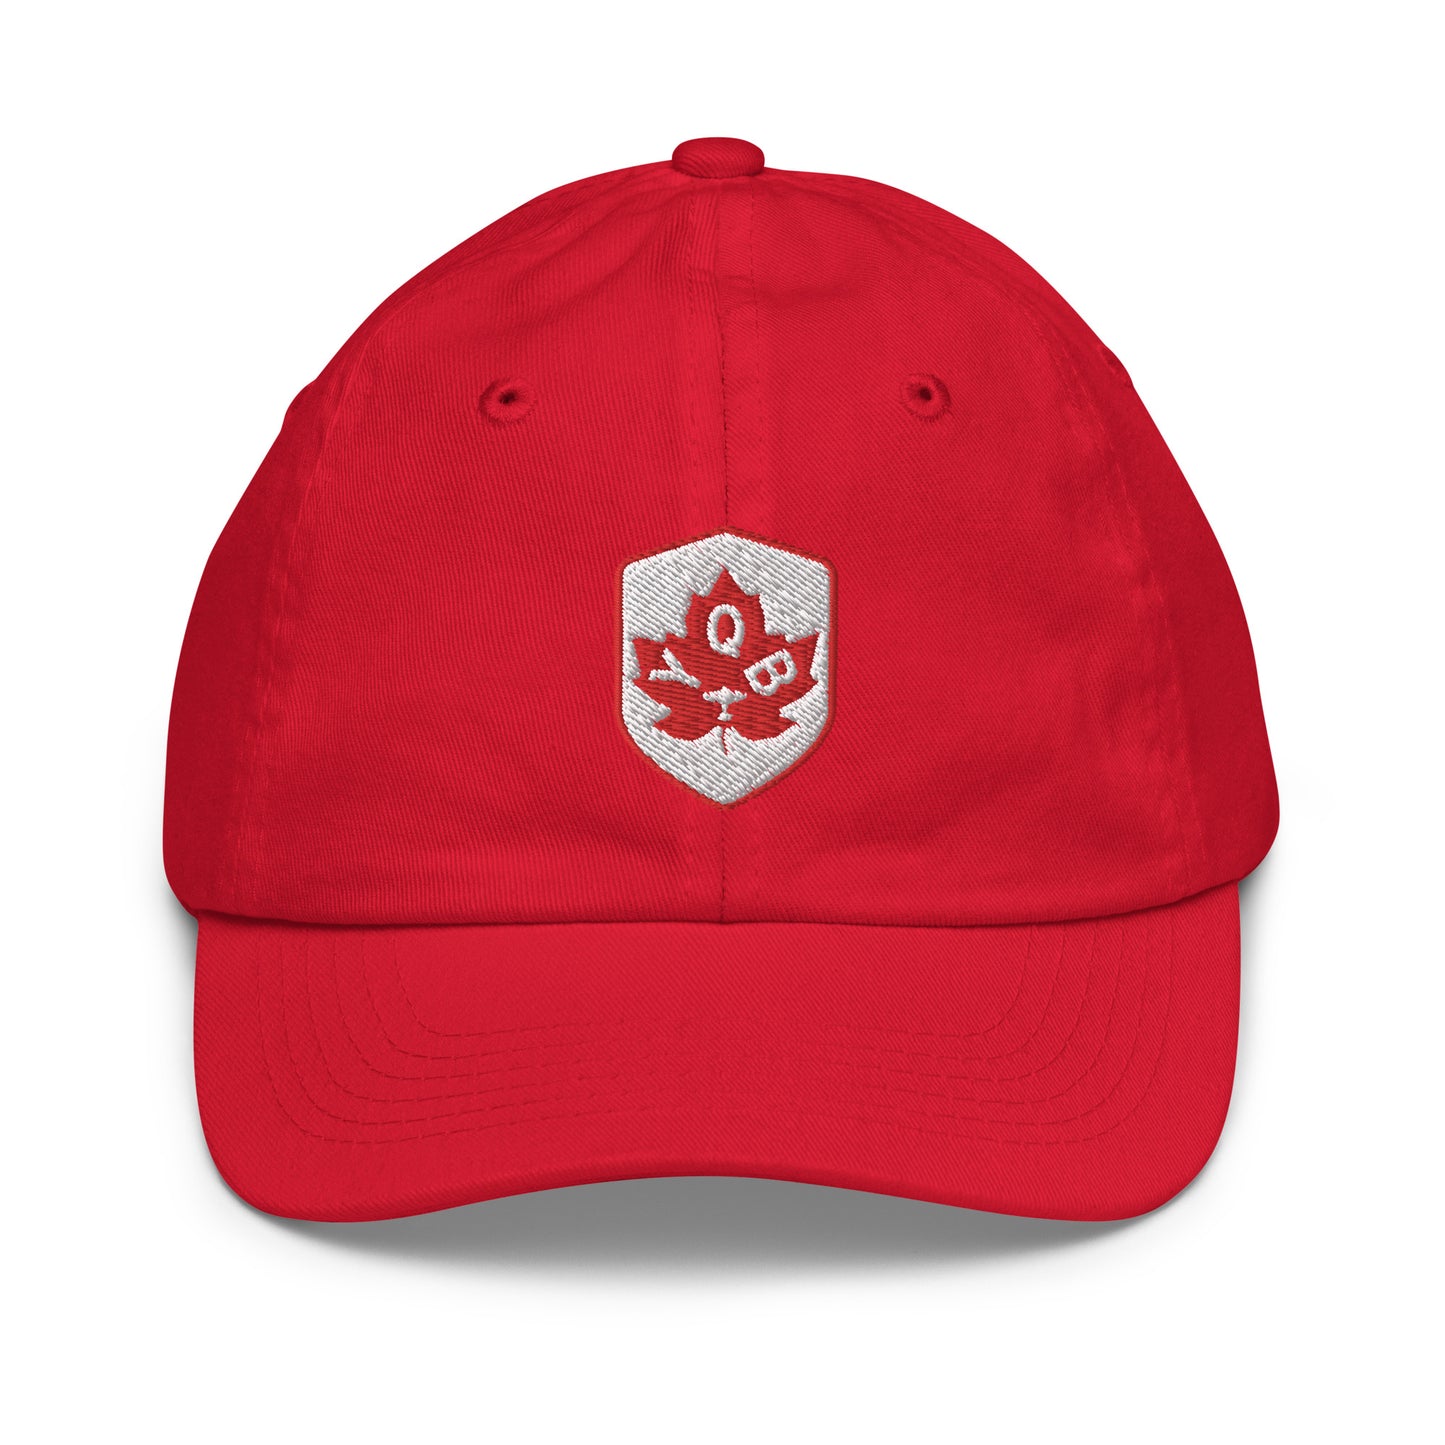 Maple Leaf Kid's Cap - Red/White • YQB Quebec City • YHM Designs - Image 16